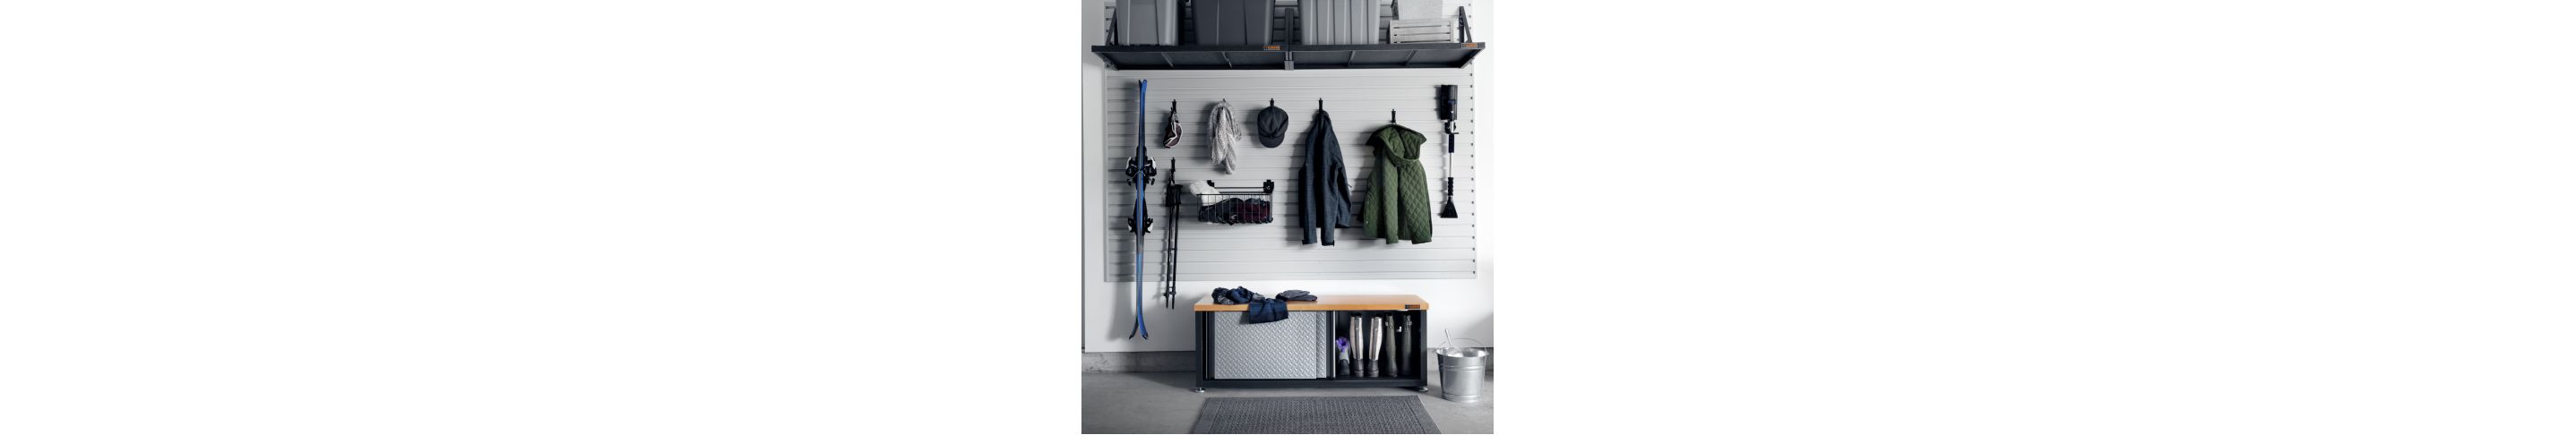 On a wall, hanging on Gladiator Hooks and in Baskets are skis, ski goggles, ski poles, jackets, winter items, a hat and an ice scraper. Below the hanging items is a Gladiator Storage Unit with an open sliding door revealing pairs of boots